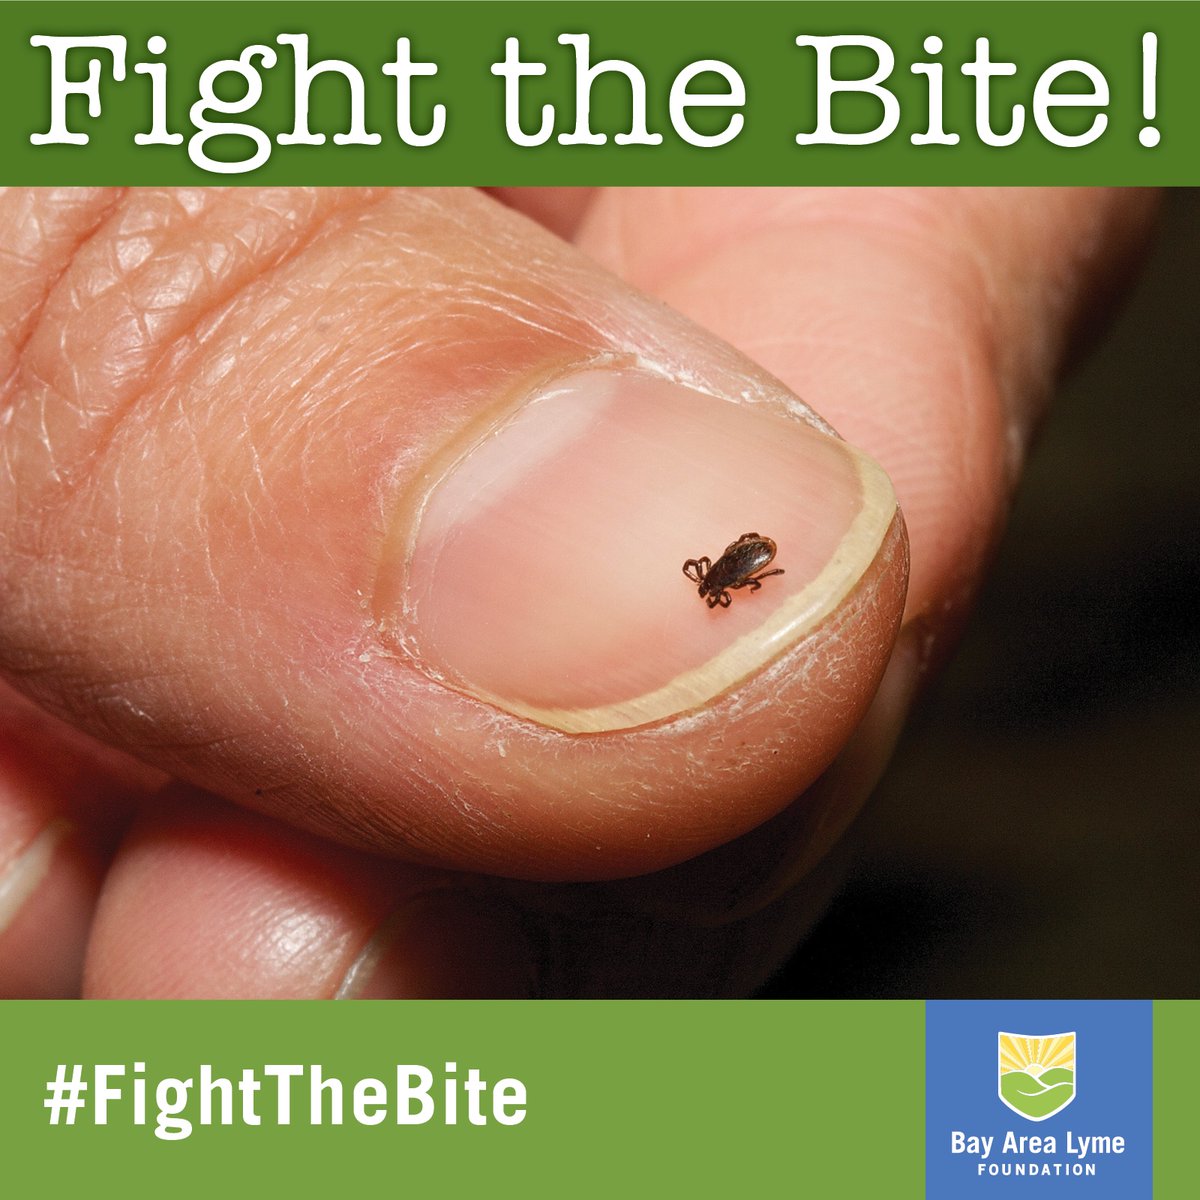 DYK: #Lyme is the fastest-growing vector-borne illness in the U.S? We are raising awareness that there is no safe amount of time for tick attachment! Stay informed & stay vigilant, let's #FightTheBite together! Check out the LDAM website for more info: LymeAwareness.org